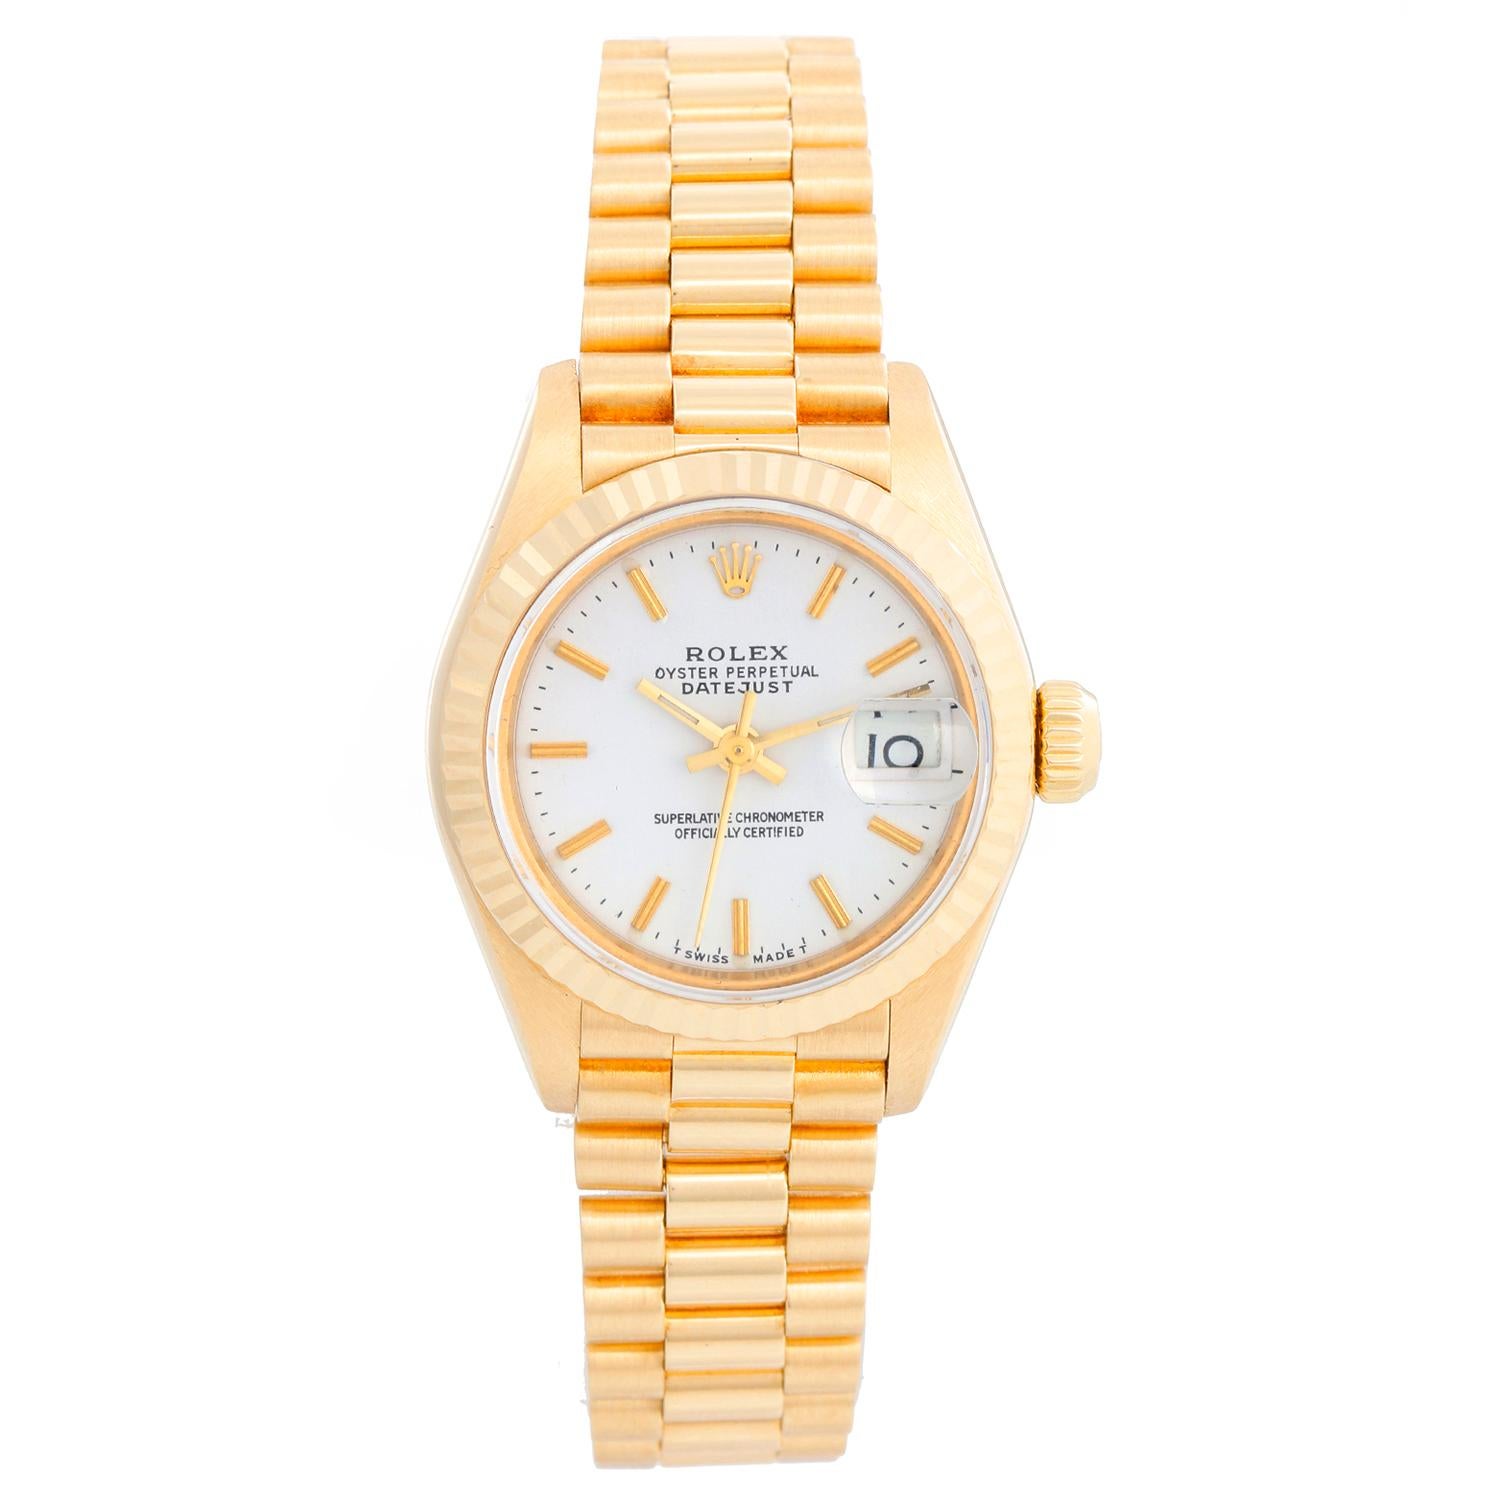 Rolex Ladies President 18K Yellow Gold 69178 Watch - Automatic winding, 29 jewels, Quickset date, sapphire crystal. 18k yellow gold case with Fluted bezel (26mm diameter). White dial with stick hour markers . 18k yellow gold hidden-clasp President